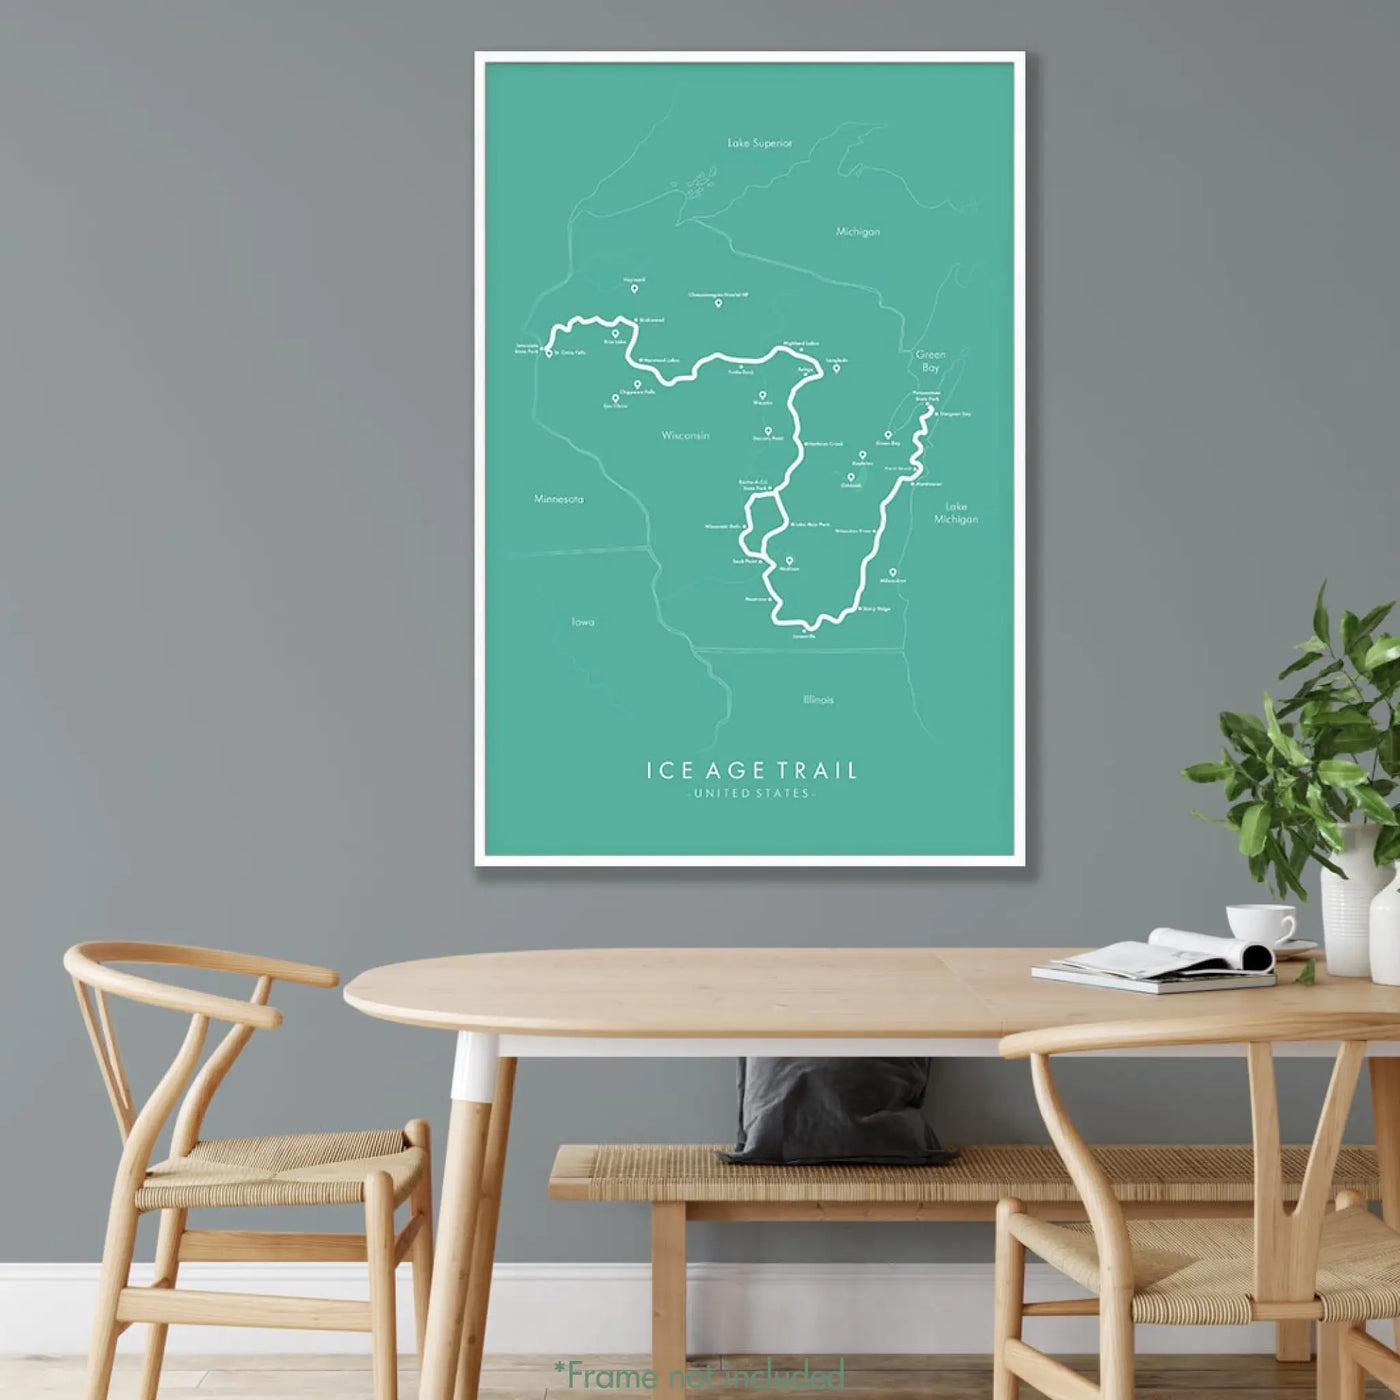 Trail Poster of Ice Age Trail - Teal Mockup